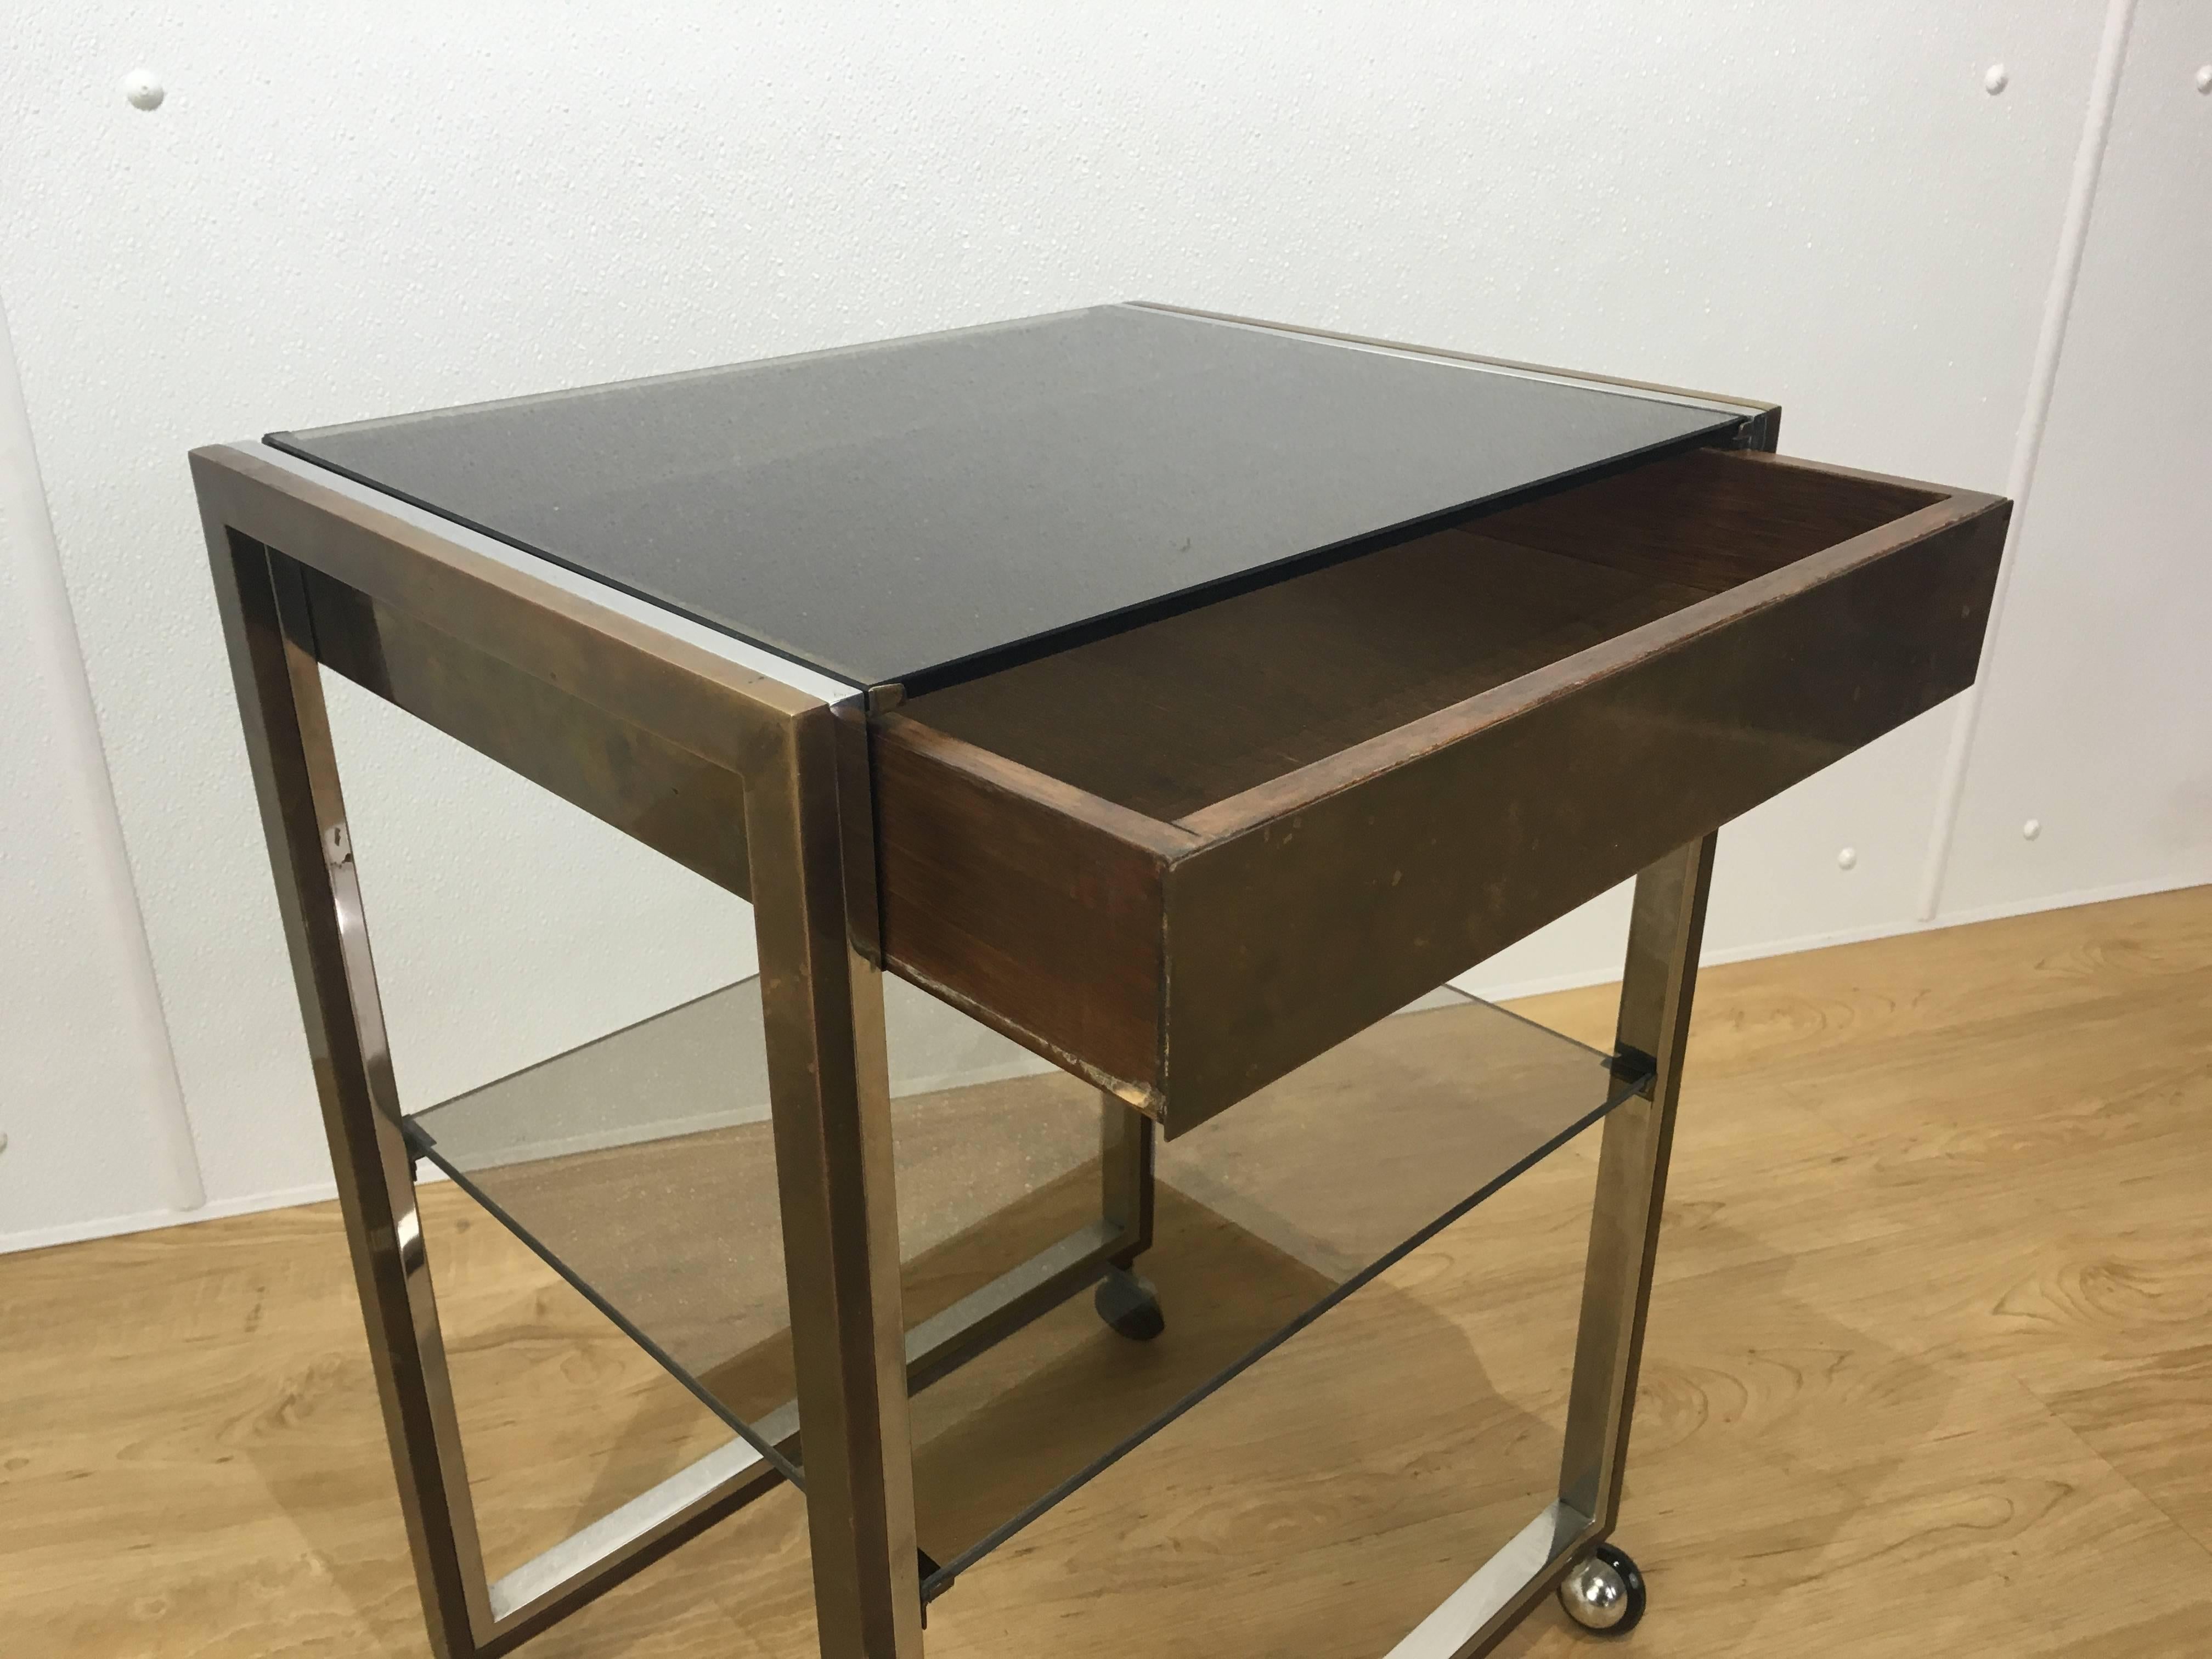 Mastercraft side table, of diminutive form with bronze glass top fitted with one drawer and middle bronze glass shelf. Supported by two-tone well cast metal frame raised on four castors. Great for living room, bedroom or office.